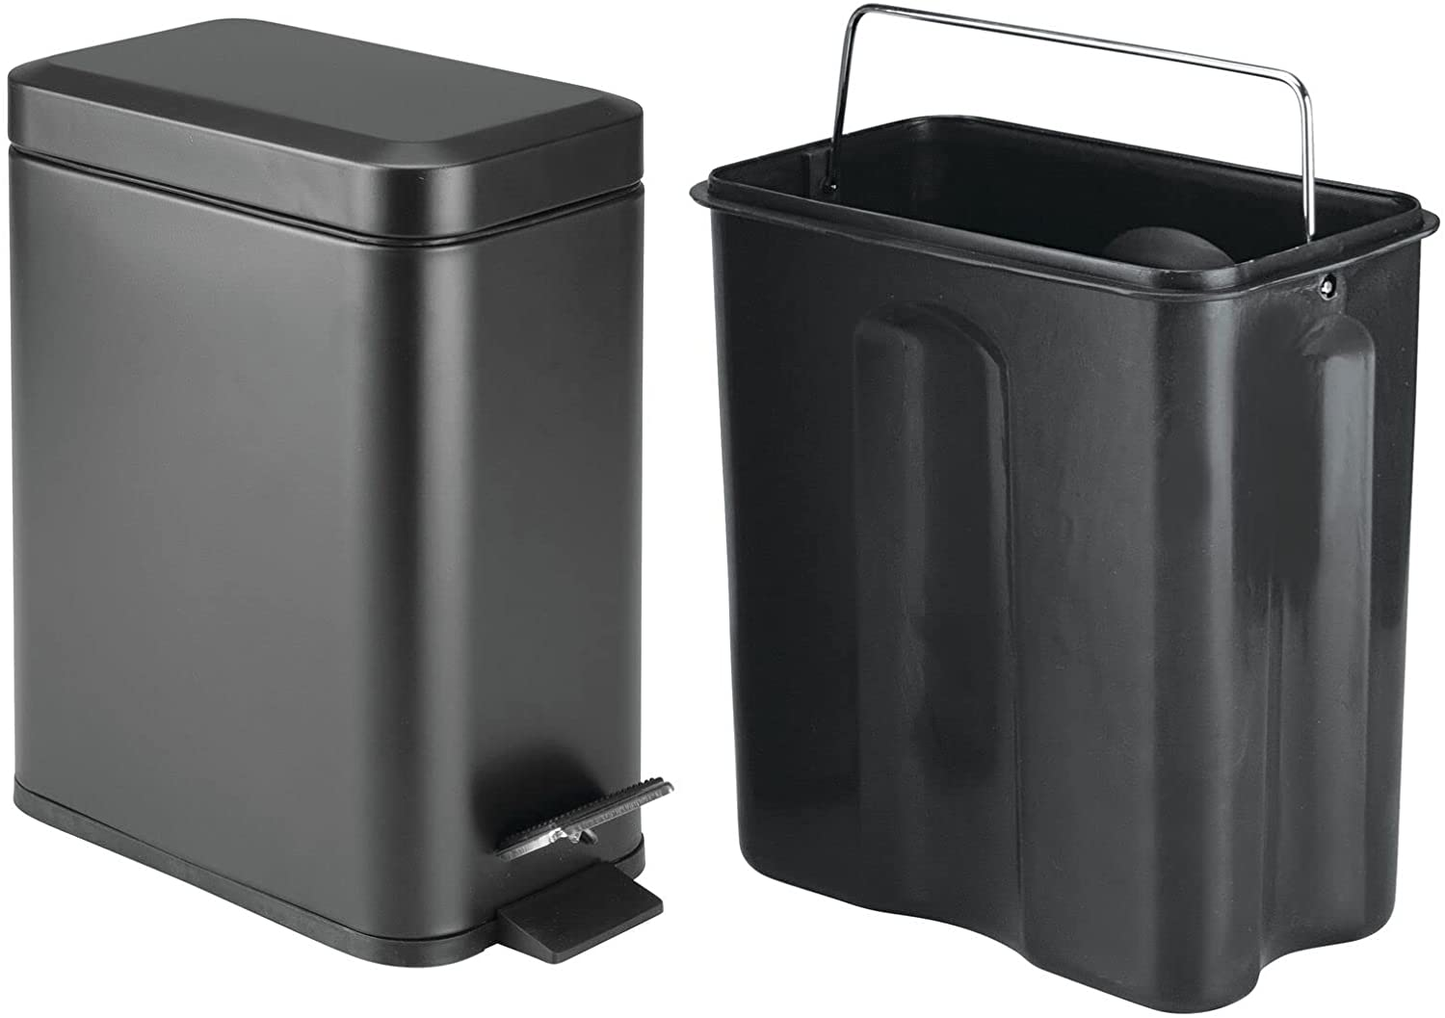 Mdesign Small Modern 1.3 Gallon Rectangle Metal Lidded Step Trash Can, Compact Garbage Bin with Removable Liner Bucket and Handle for Bathroom, Kitchen, Craft Room, Office, Garage - Black